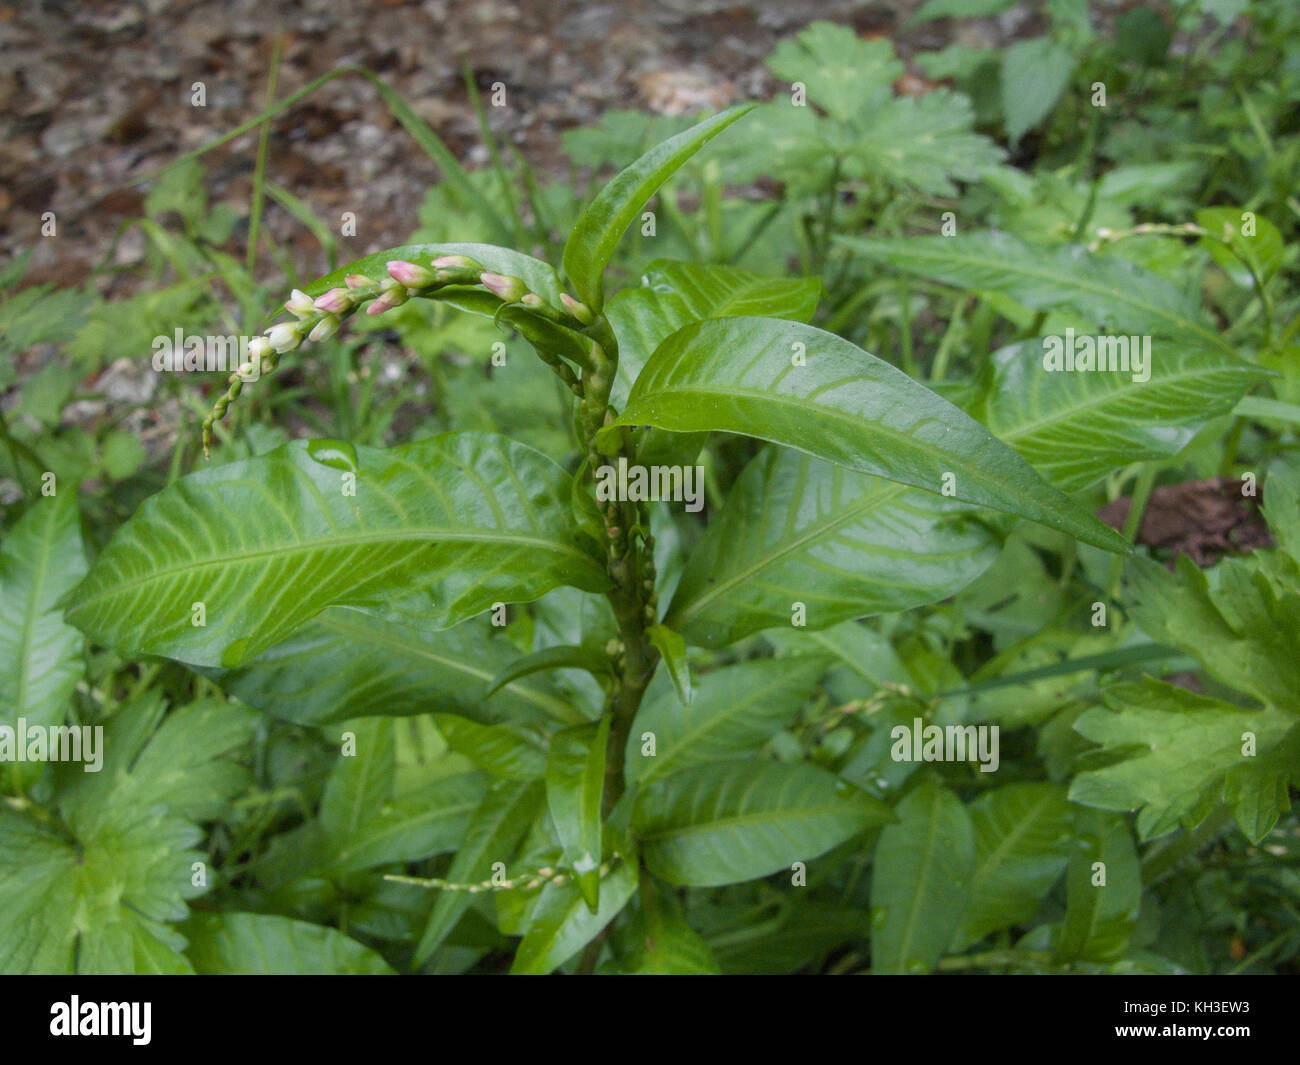 Specimen of Water Pepper / Polygonum hydropiper foliage and tops  prior to flowers opening. Sometimes used in the past in domestic folk remedies. Stock Photo